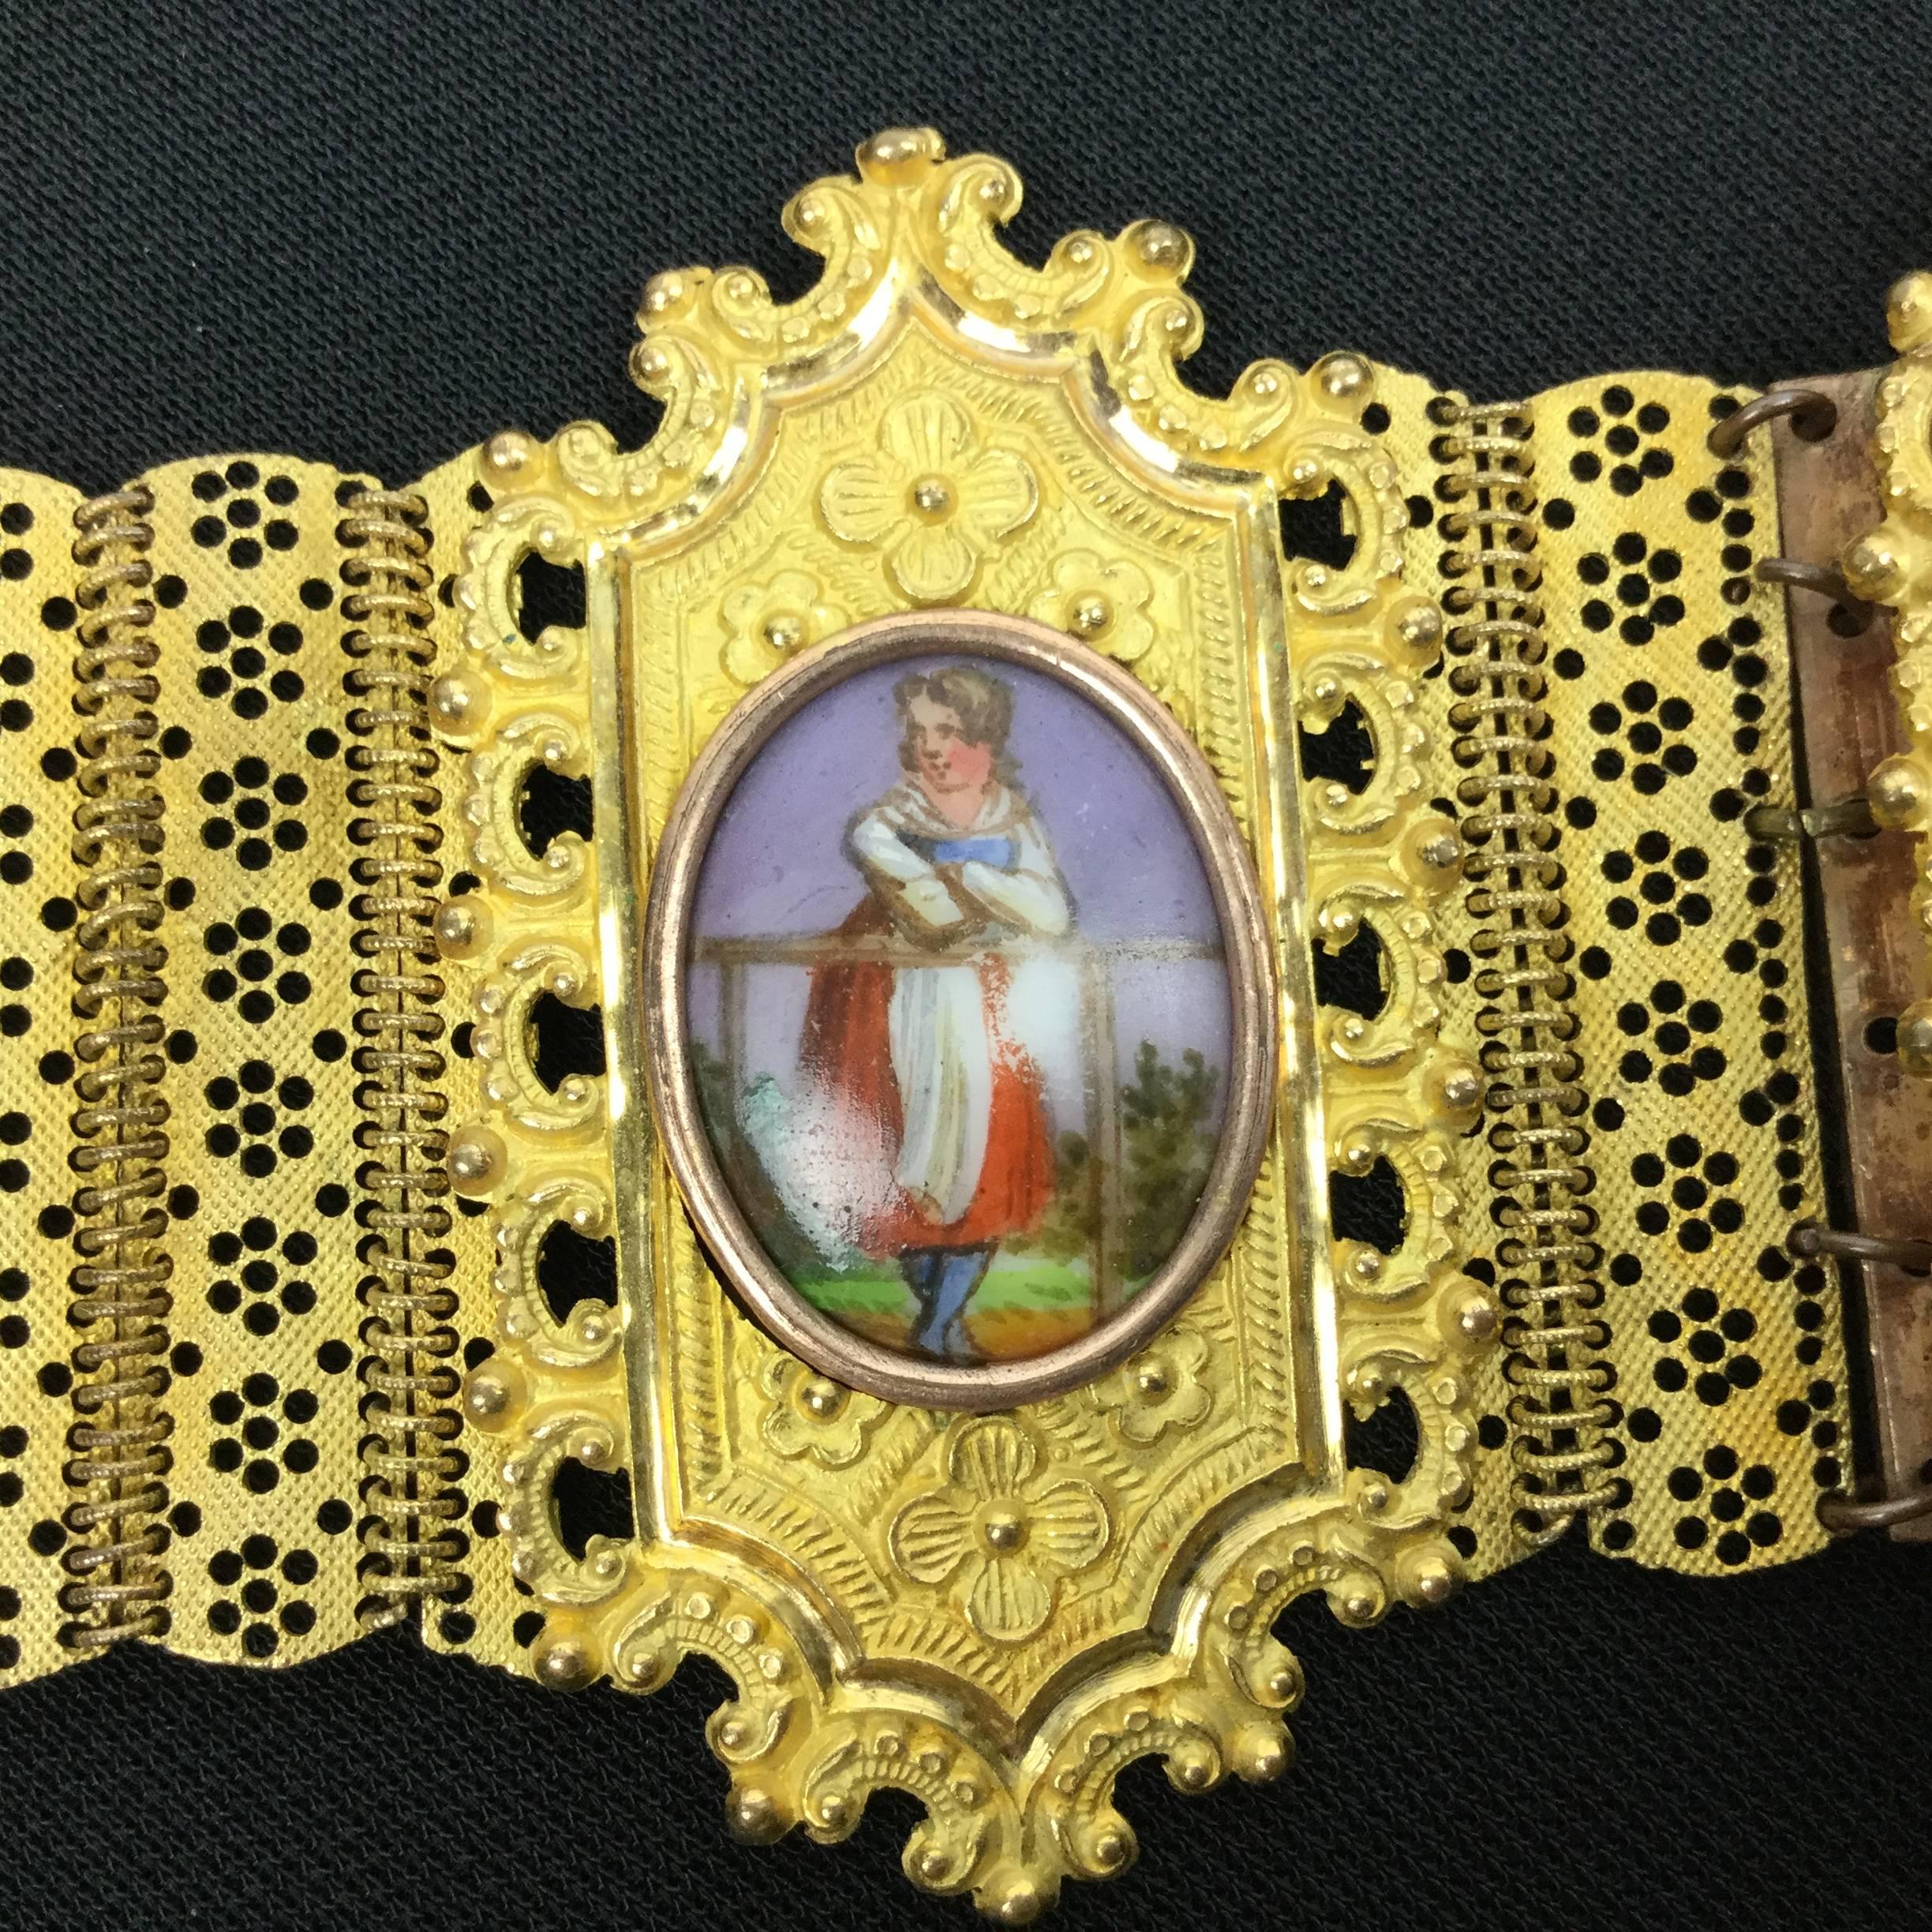 Incredibly detailed antique Georgian bracelet made of Pinchbeck with four 
hand painted porcelain portraits framed and inset on elaborately decorated
panels.

Pastoral Themed. So romantic!

Wafer thin panels connected by multiple links.